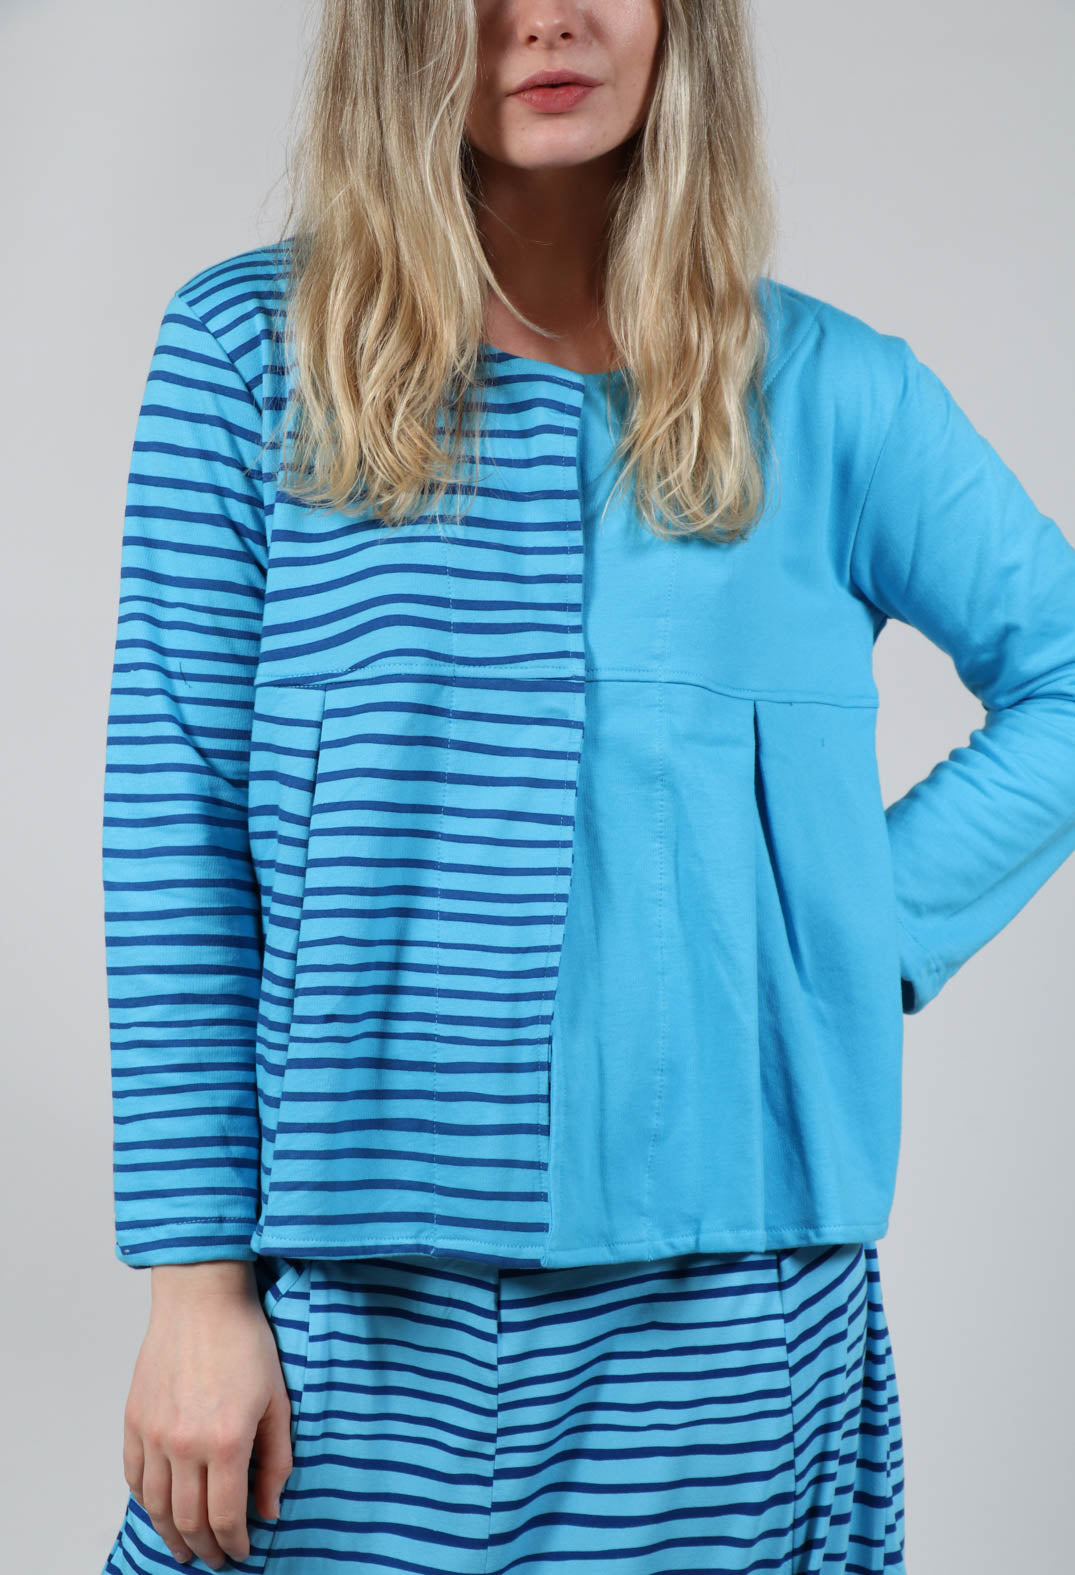 Contrast Sleeve Top in Turquoise with Blue Lines